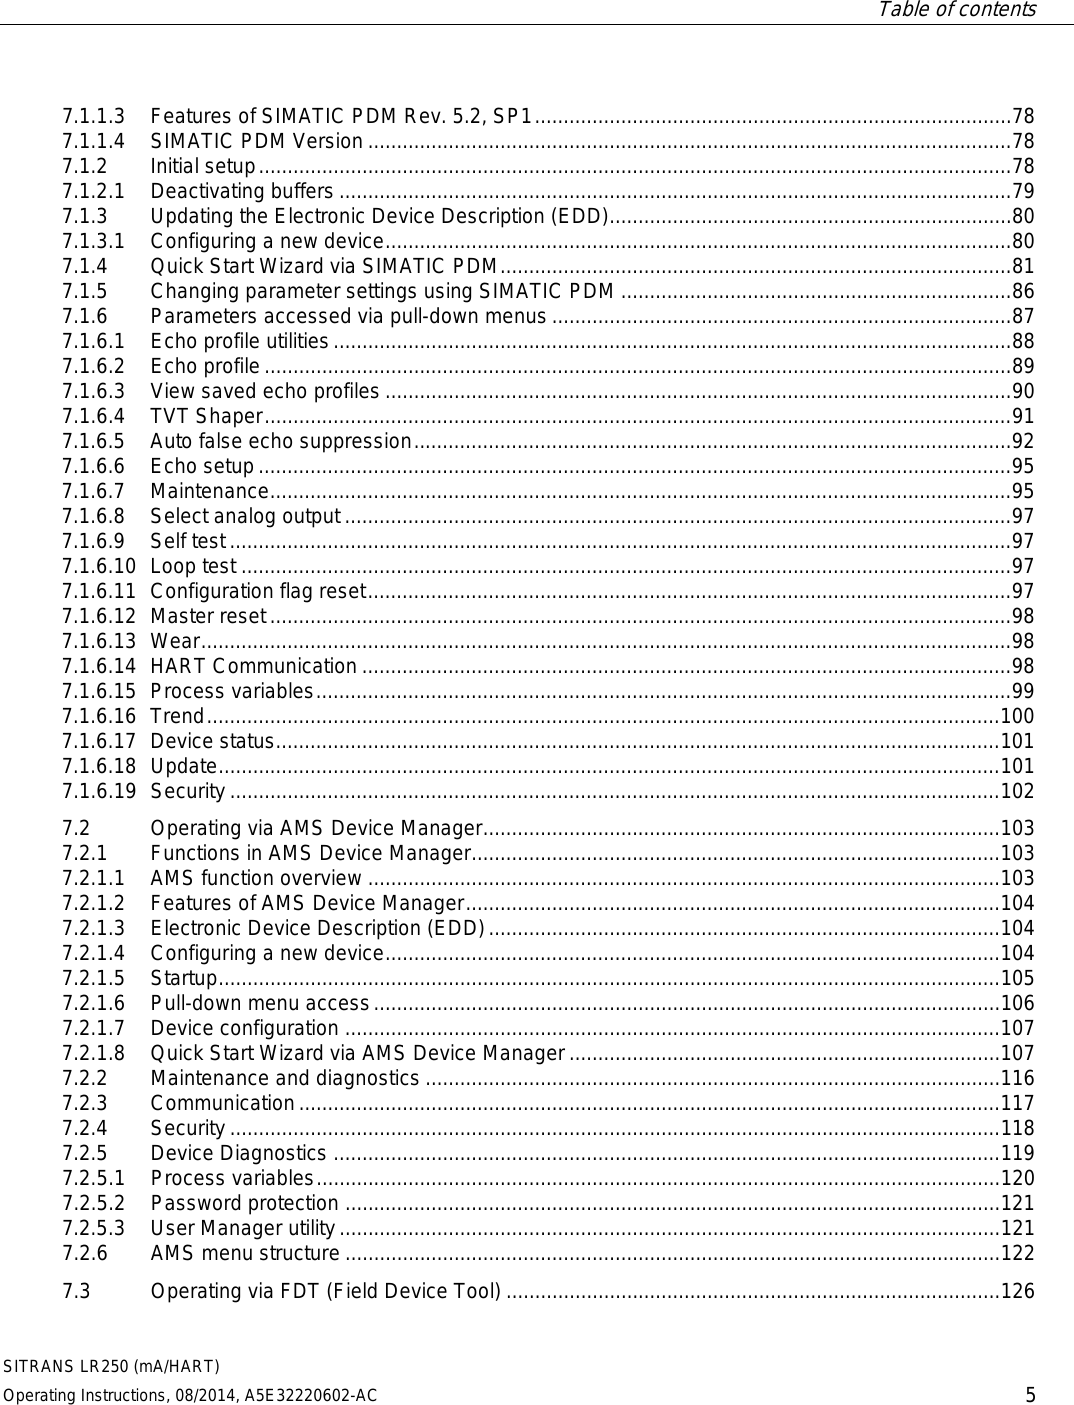  Table of contents   SITRANS LR250 (mA/HART) Operating Instructions, 08/2014, A5E32220602-AC 5 7.1.1.3 Features of SIMATIC PDM Rev. 5.2, SP1 ................................................................................... 78 7.1.1.4 SIMATIC PDM Version ................................................................................................................ 78 7.1.2 Initial setup ................................................................................................................................... 78 7.1.2.1 Deactivating buffers ..................................................................................................................... 79 7.1.3 Updating the Electronic Device Description (EDD) ...................................................................... 80 7.1.3.1 Configuring a new device ............................................................................................................. 80 7.1.4 Quick Start Wizard via SIMATIC PDM ......................................................................................... 81 7.1.5 Changing parameter settings using SIMATIC PDM .................................................................... 86 7.1.6 Parameters accessed via pull-down menus ................................................................................ 87 7.1.6.1 Echo profile utilities ...................................................................................................................... 88 7.1.6.2 Echo profile .................................................................................................................................. 89 7.1.6.3 View saved echo profiles ............................................................................................................. 90 7.1.6.4 TVT Shaper .................................................................................................................................. 91 7.1.6.5 Auto false echo suppression ........................................................................................................ 92 7.1.6.6 Echo setup ................................................................................................................................... 95 7.1.6.7 Maintenance ................................................................................................................................. 95 7.1.6.8 Select analog output .................................................................................................................... 97 7.1.6.9 Self test ........................................................................................................................................ 97 7.1.6.10 Loop test ...................................................................................................................................... 97 7.1.6.11 Configuration flag reset ................................................................................................................ 97 7.1.6.12 Master reset ................................................................................................................................. 98 7.1.6.13 Wear ............................................................................................................................................. 98 7.1.6.14 HART Communication ................................................................................................................. 98 7.1.6.15 Process variables ......................................................................................................................... 99 7.1.6.16 Trend .......................................................................................................................................... 100 7.1.6.17 Device status .............................................................................................................................. 101 7.1.6.18 Update ........................................................................................................................................ 101 7.1.6.19  Security ...................................................................................................................................... 102 7.2 Operating via AMS Device Manager.......................................................................................... 103 7.2.1 Functions in AMS Device Manager............................................................................................ 103 7.2.1.1 AMS function overview .............................................................................................................. 103 7.2.1.2 Features of AMS Device Manager ............................................................................................. 104 7.2.1.3 Electronic Device Description (EDD) ......................................................................................... 104 7.2.1.4 Configuring a new device ........................................................................................................... 104 7.2.1.5 Startup ........................................................................................................................................ 105 7.2.1.6 Pull-down menu access ............................................................................................................. 106 7.2.1.7 Device configuration .................................................................................................................. 107 7.2.1.8 Quick Start Wizard via AMS Device Manager ........................................................................... 107 7.2.2 Maintenance and diagnostics .................................................................................................... 116 7.2.3 Communication .......................................................................................................................... 117 7.2.4 Security ...................................................................................................................................... 118 7.2.5 Device Diagnostics .................................................................................................................... 119 7.2.5.1 Process variables ....................................................................................................................... 120 7.2.5.2 Password protection .................................................................................................................. 121 7.2.5.3 User Manager utility ................................................................................................................... 121 7.2.6 AMS menu structure .................................................................................................................. 122 7.3 Operating via FDT (Field Device Tool) ...................................................................................... 126 